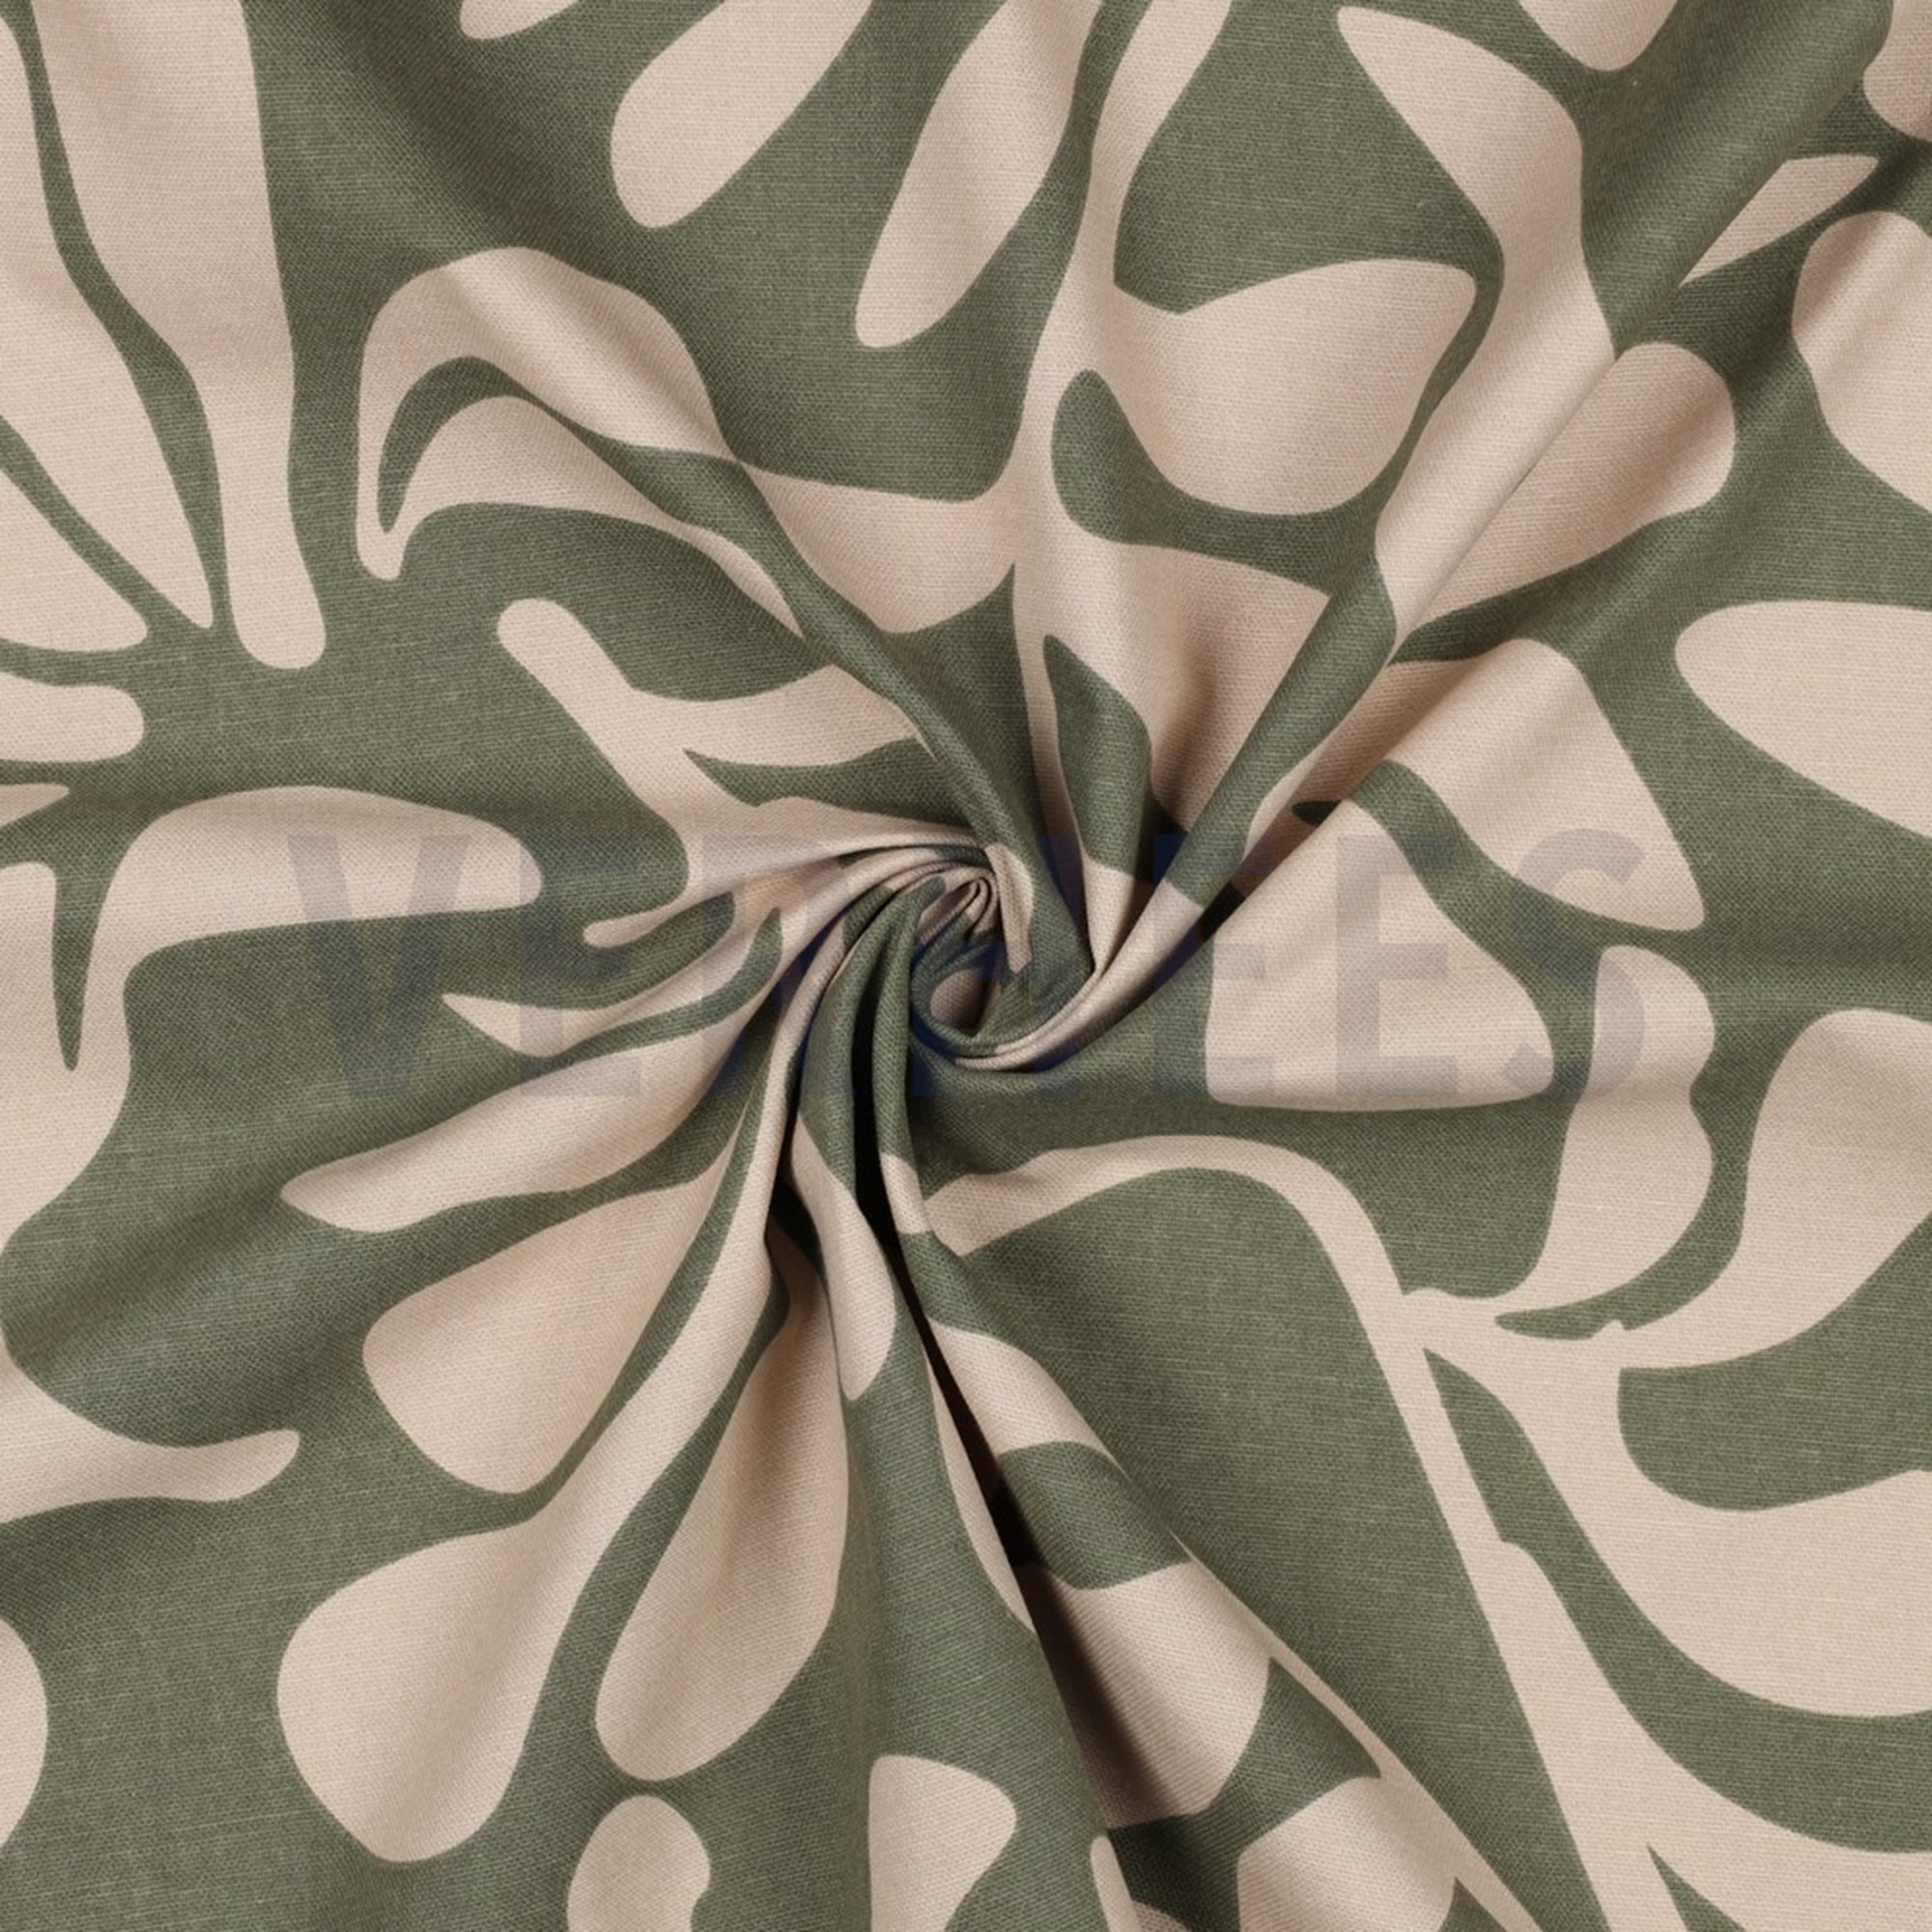 CANVAS VINTAGE LEAVES ARMY GREEN (high resolution) #2